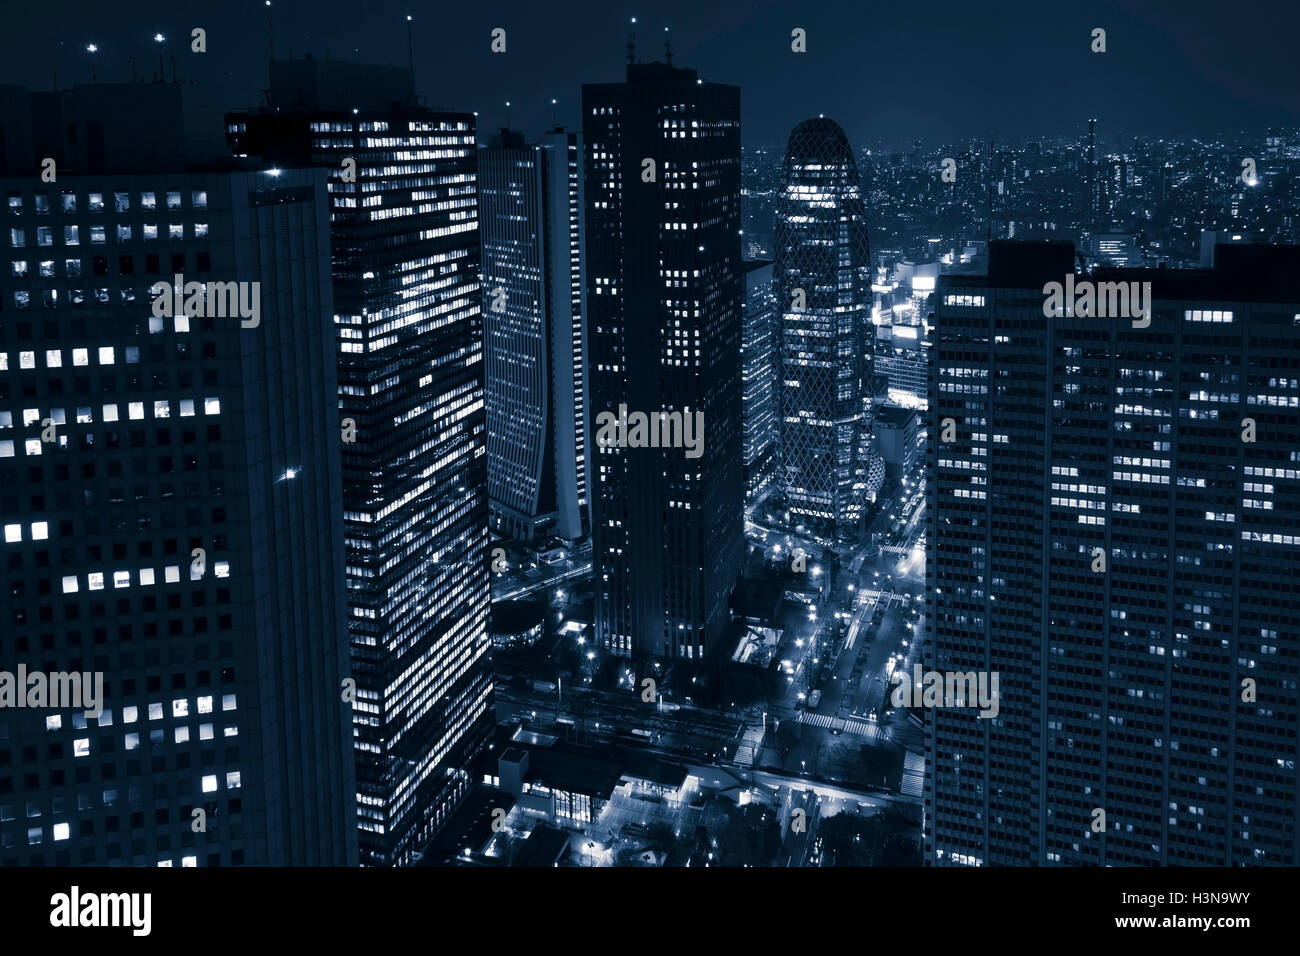 Modern business district with skyscrapers at night Stock Photo